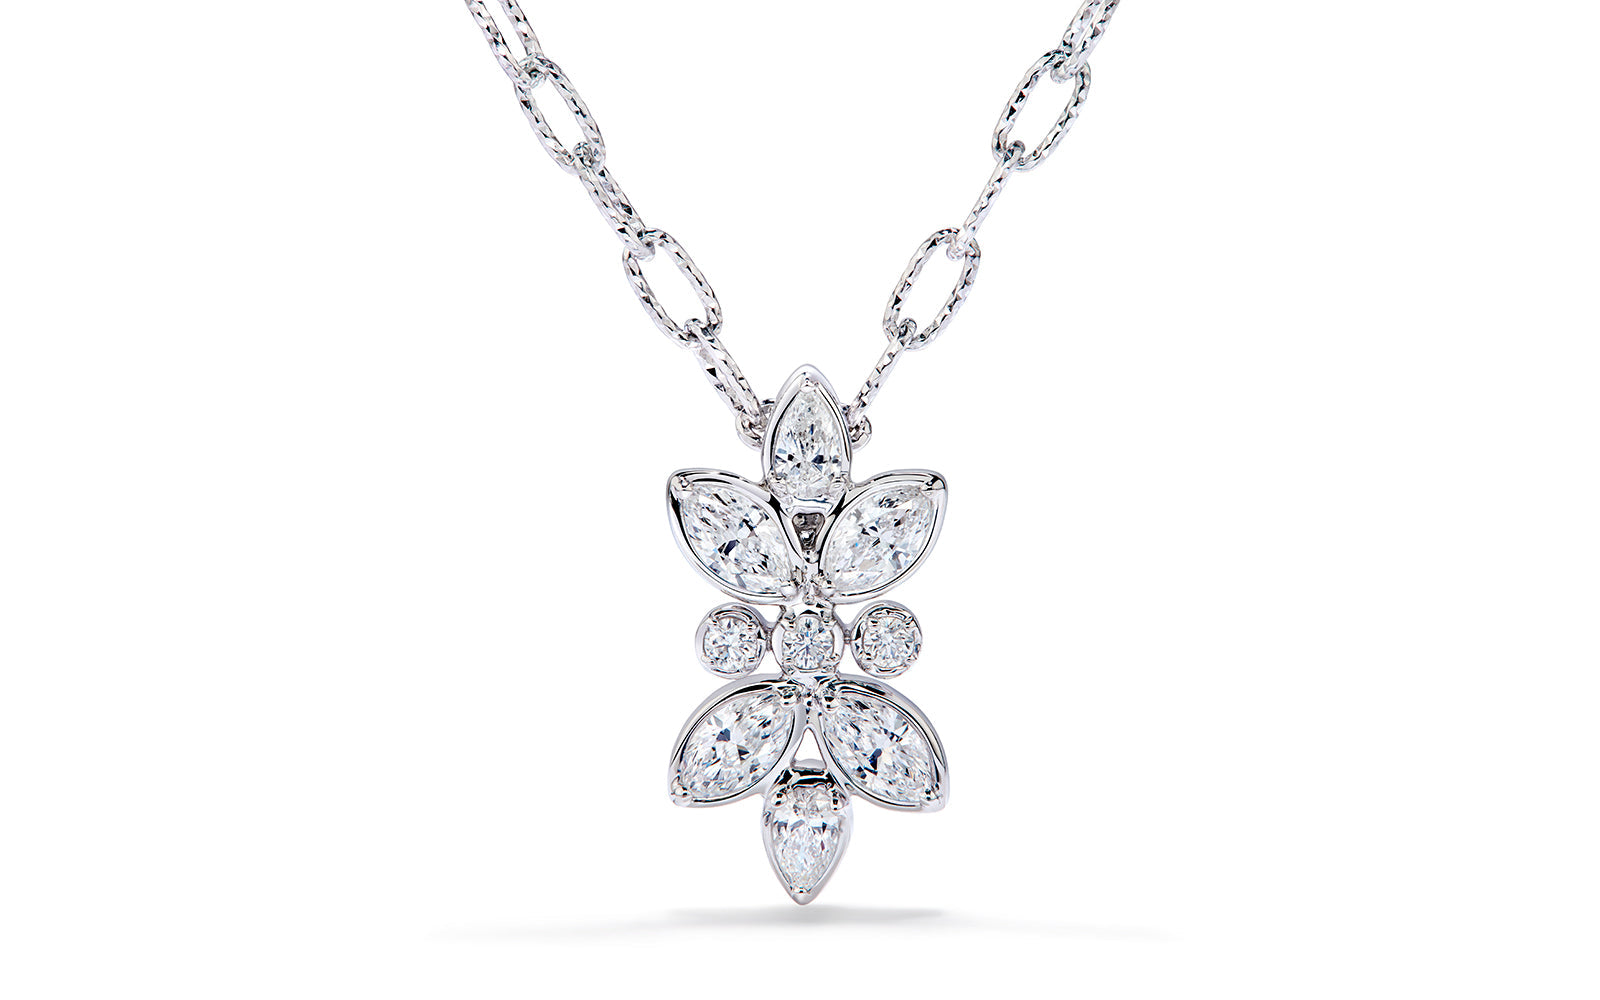 0.56ct D Flawless Diamond Necklace set in 18K White Gold